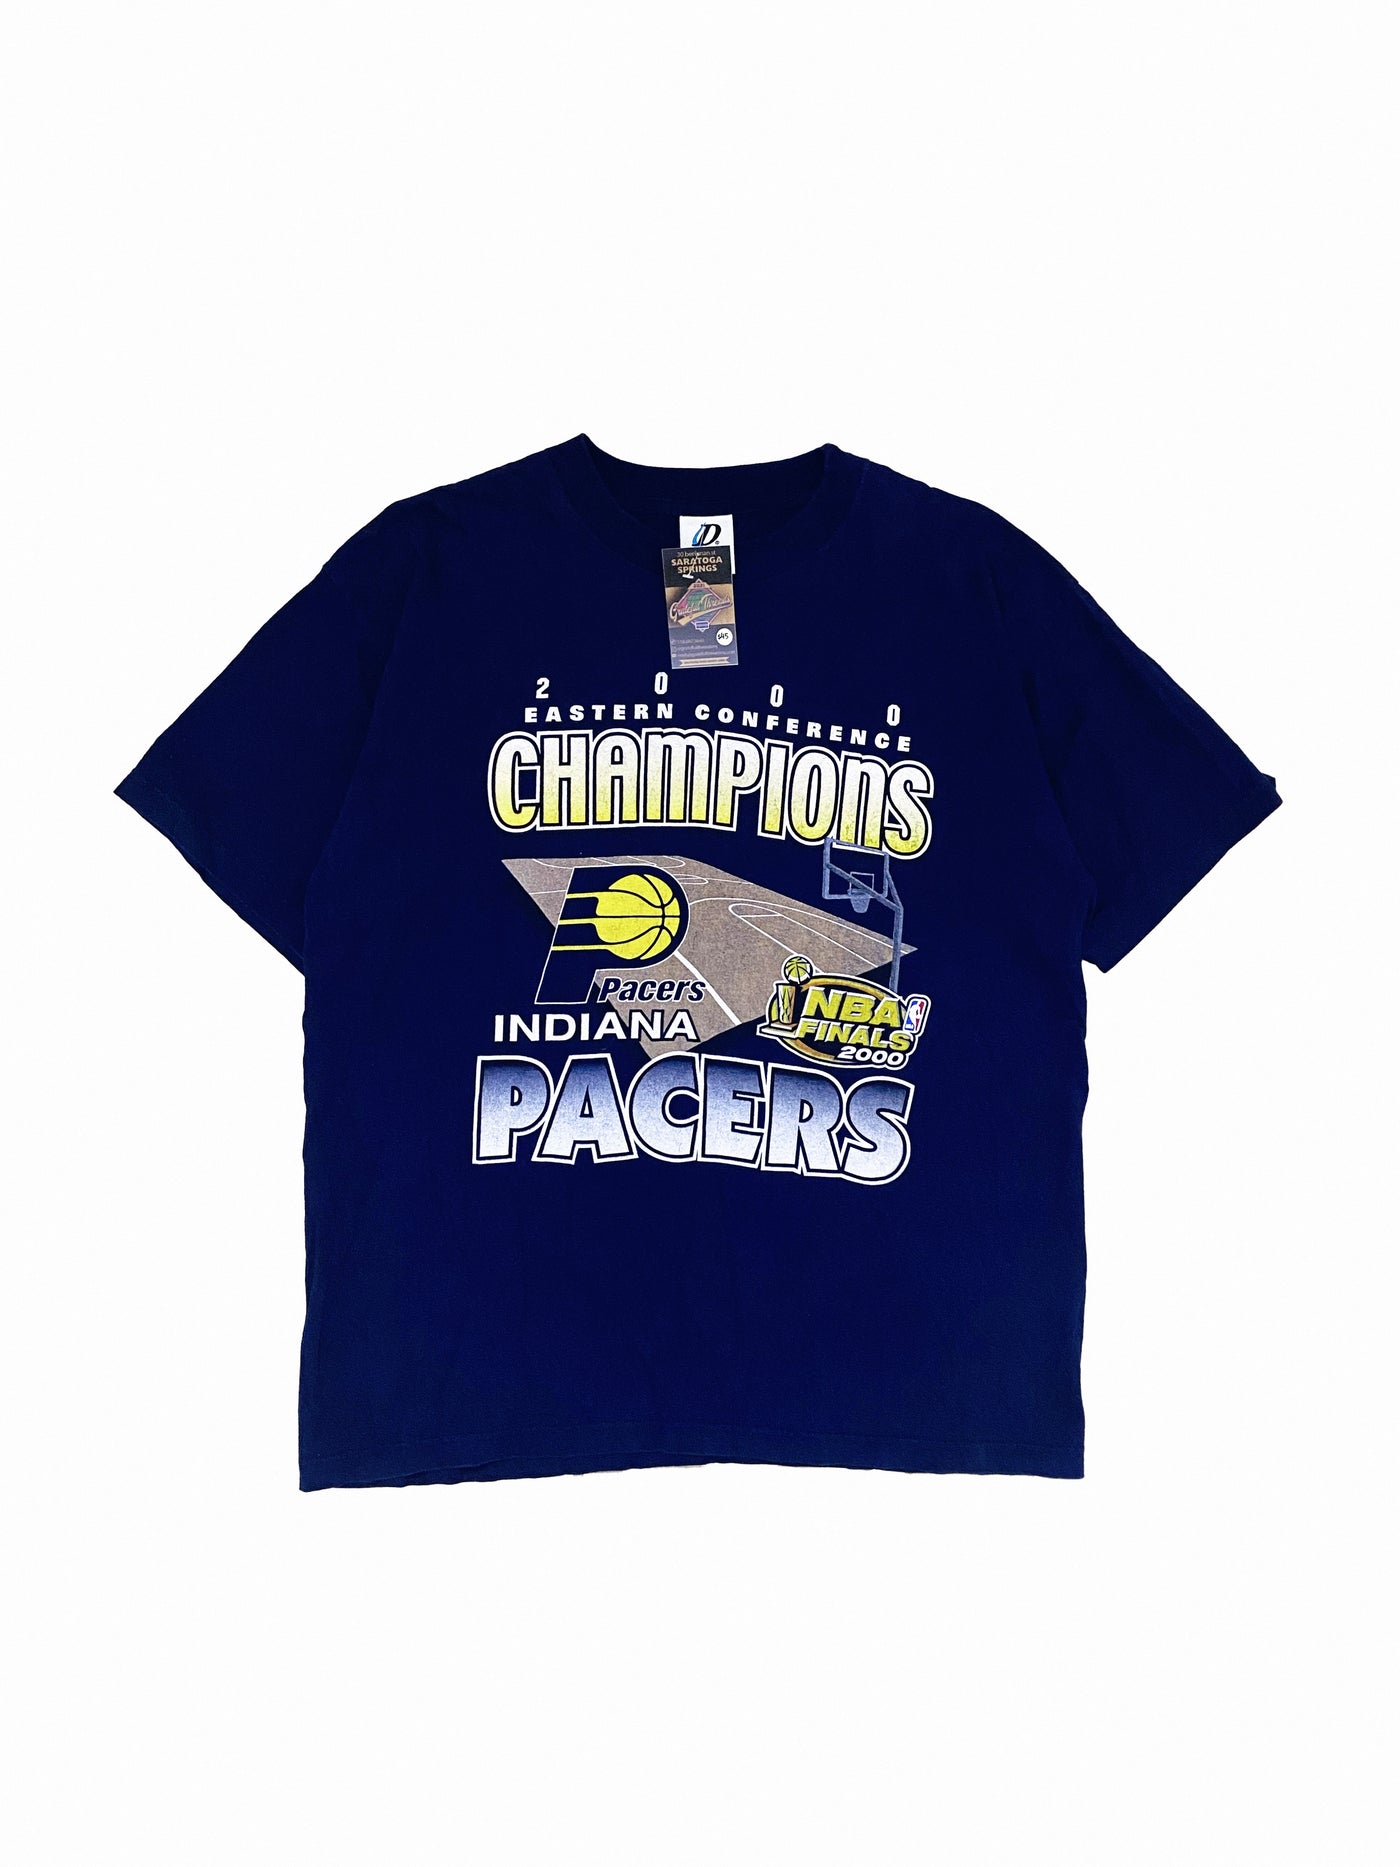 Vintage 2000 Pacers Eastern Conference Champs T-Shirt